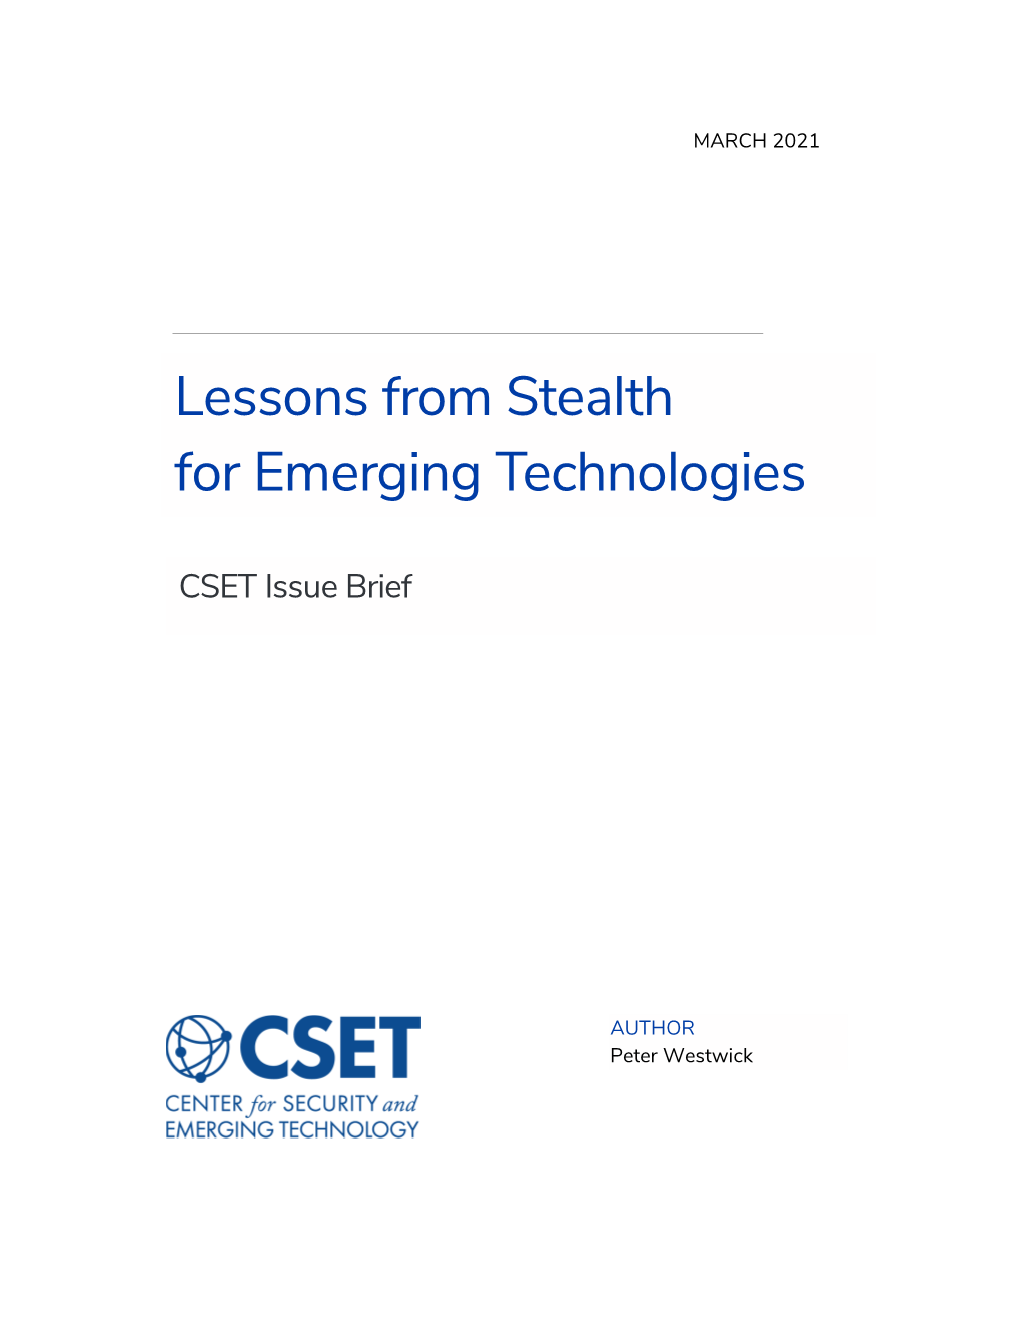 Lessons from Stealth for Emerging Technologies